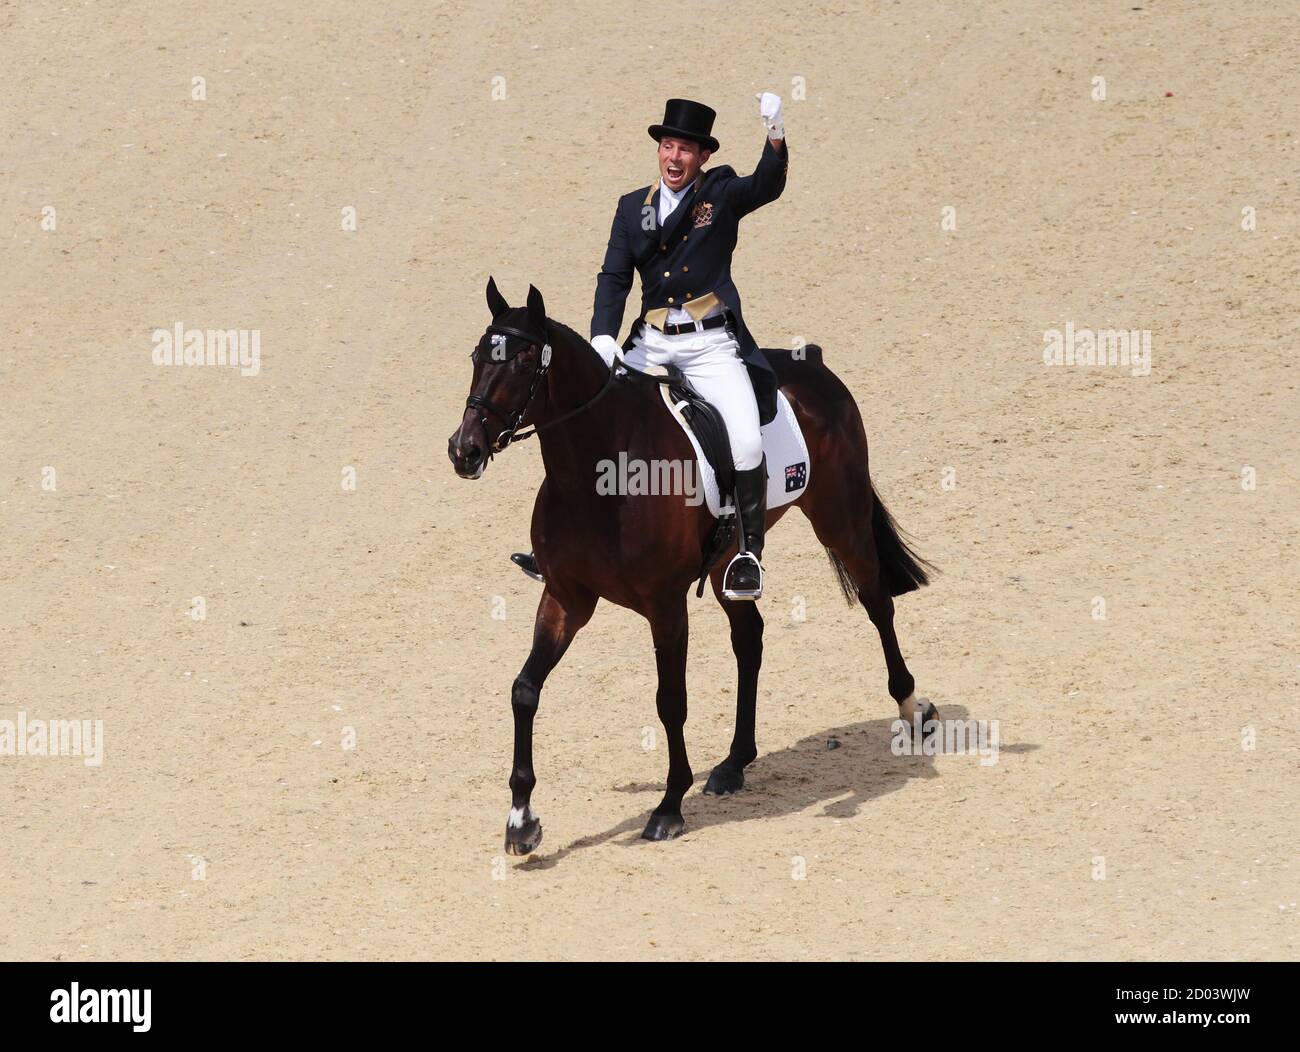 New Zealand rider Sam Griffiths with his horse Happy Times reacts after his score is announced during the Eventing Individual Dressage at the Olympic equestrian arena in Greenwich Park during the London 2012 Olympic Games July 28, 2012. REUTERS/Olivia Harris (BRITAIN - Tags: SPORT OLYMPICS EQUESTRIANISM) Stock Photo